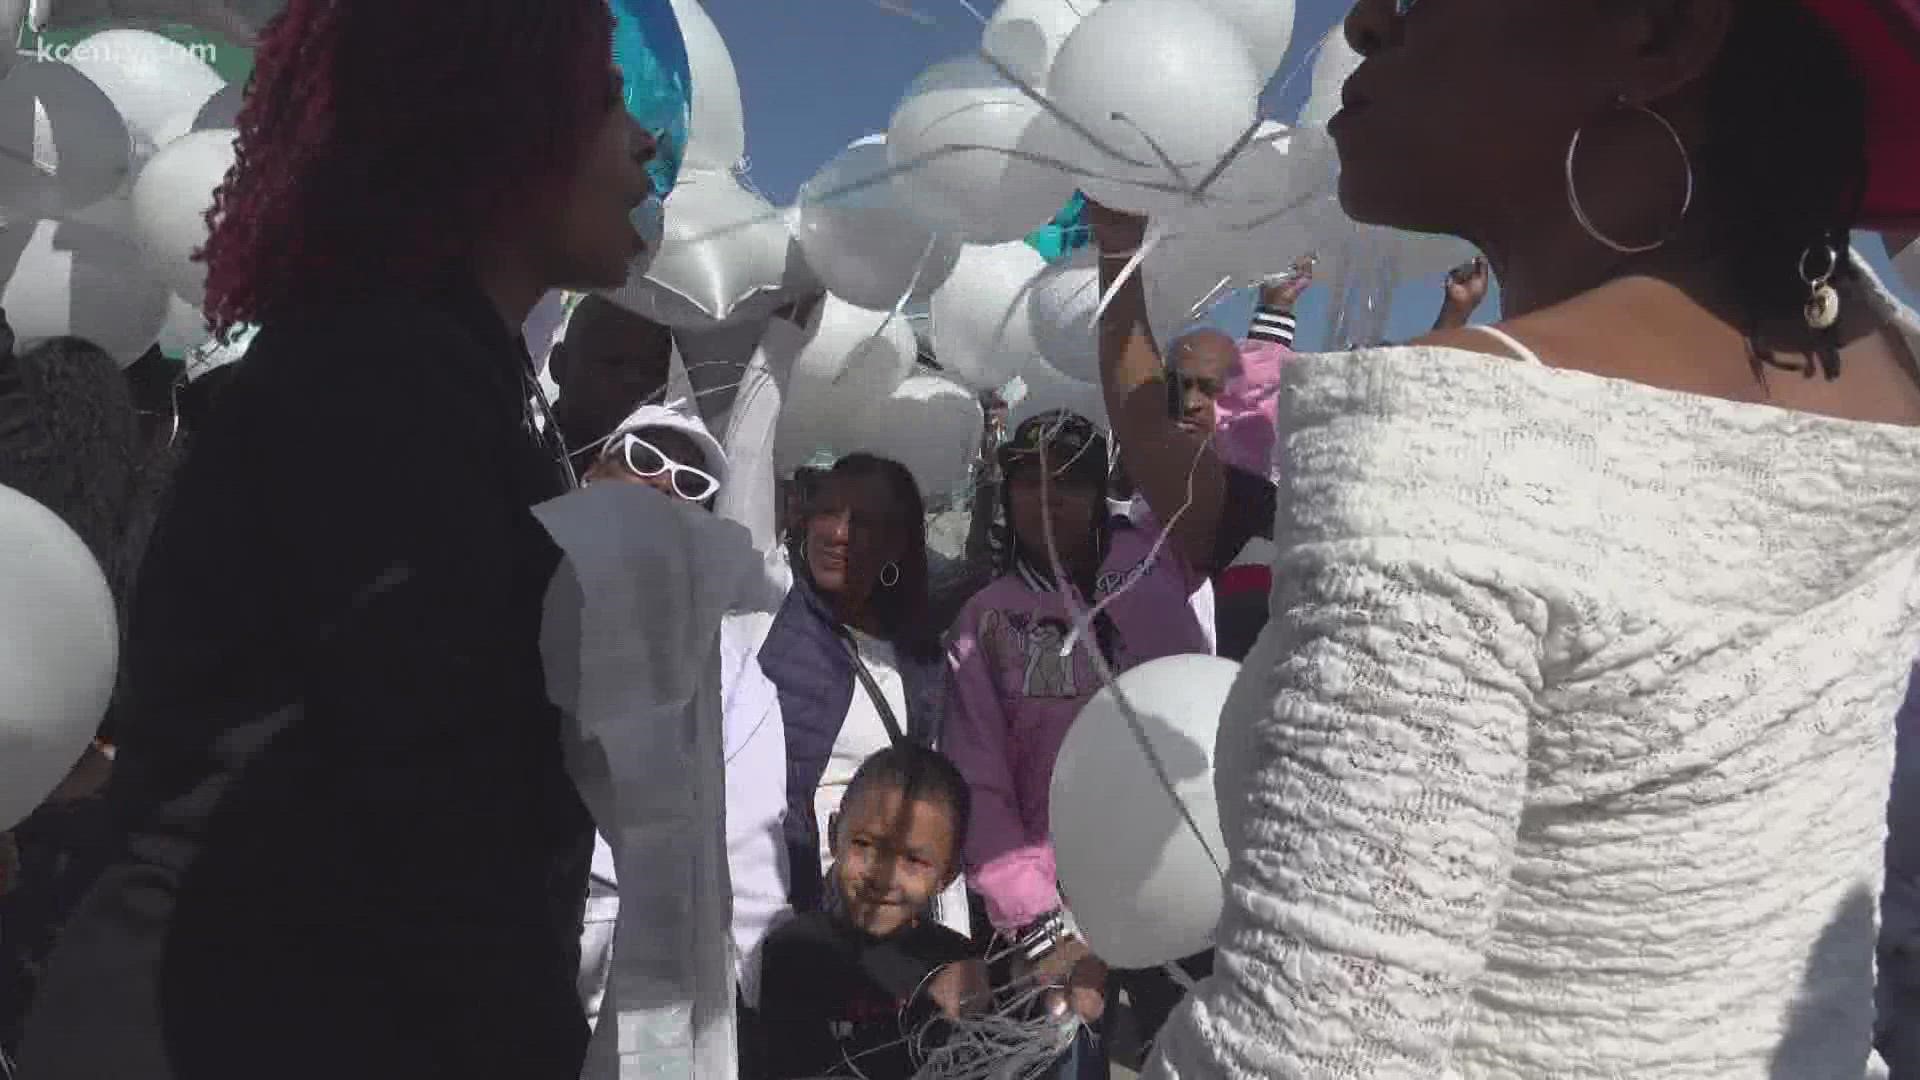 Balloon release held for Killeen homicide victim, Robin Lynn Ashford as her family waits for answers they celebrate her life.